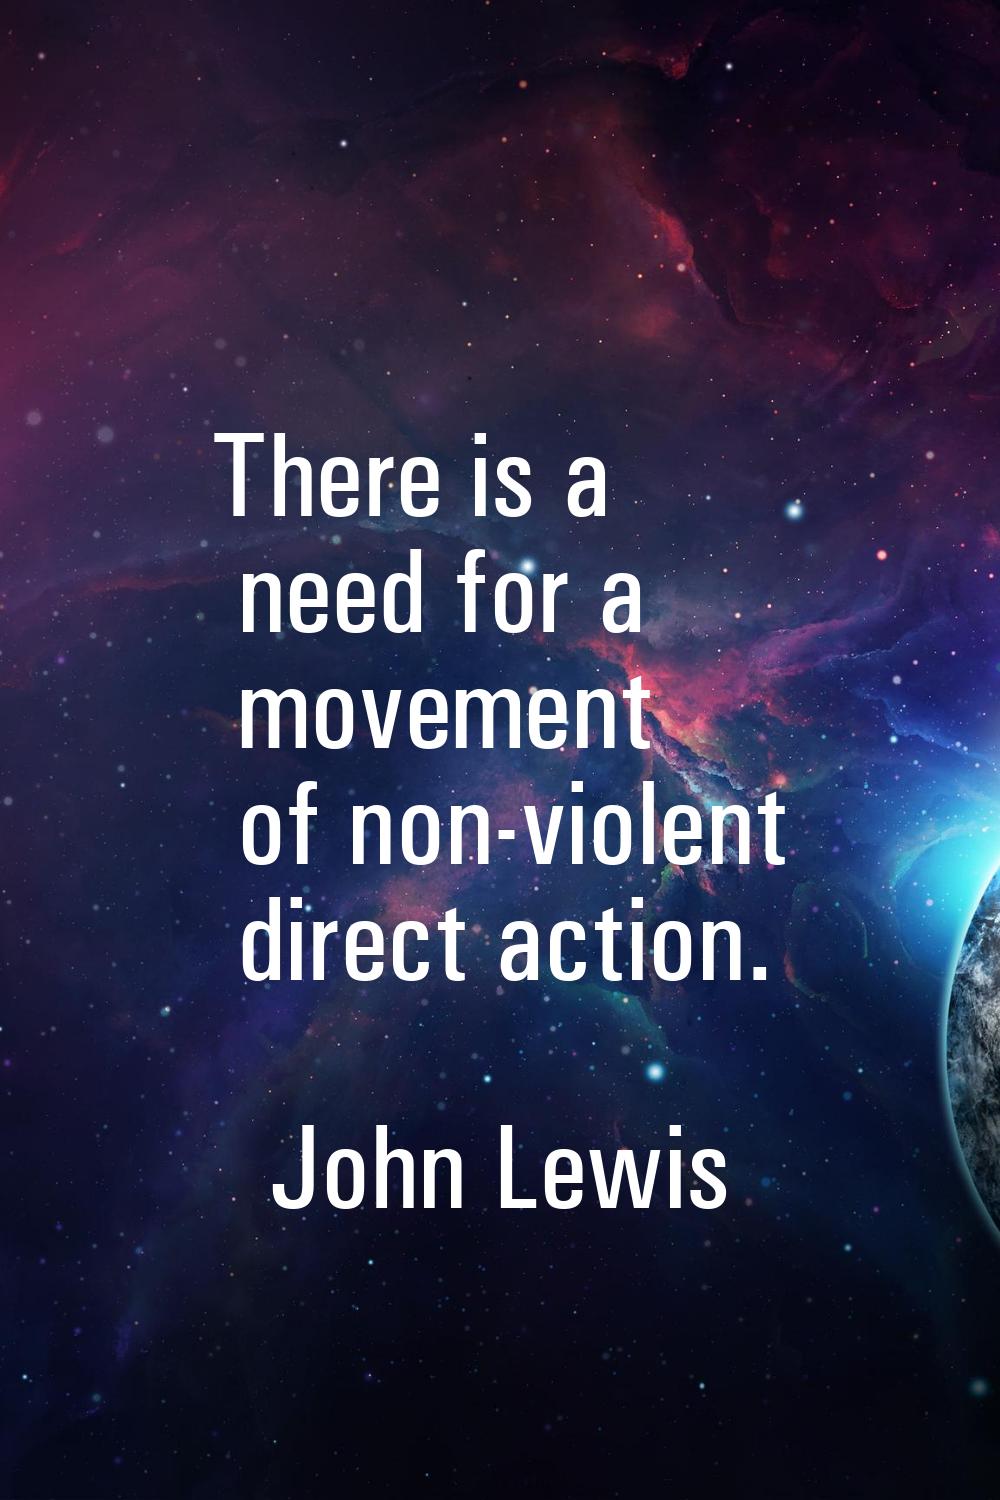 There is a need for a movement of non-violent direct action.